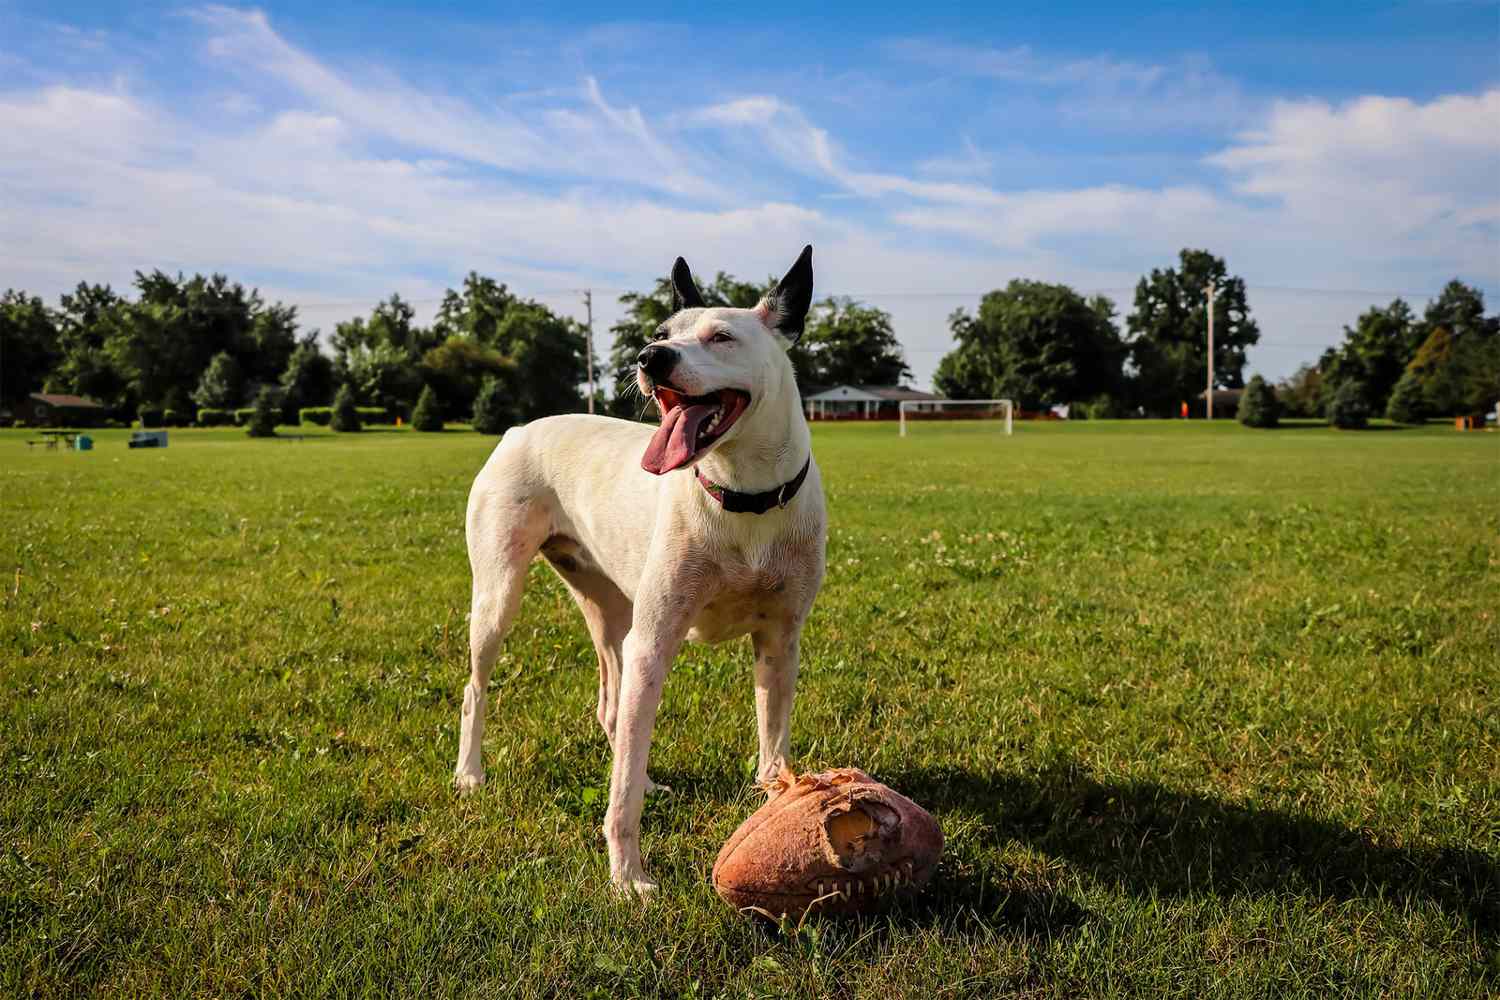 dog stands by football toy in large grassy area